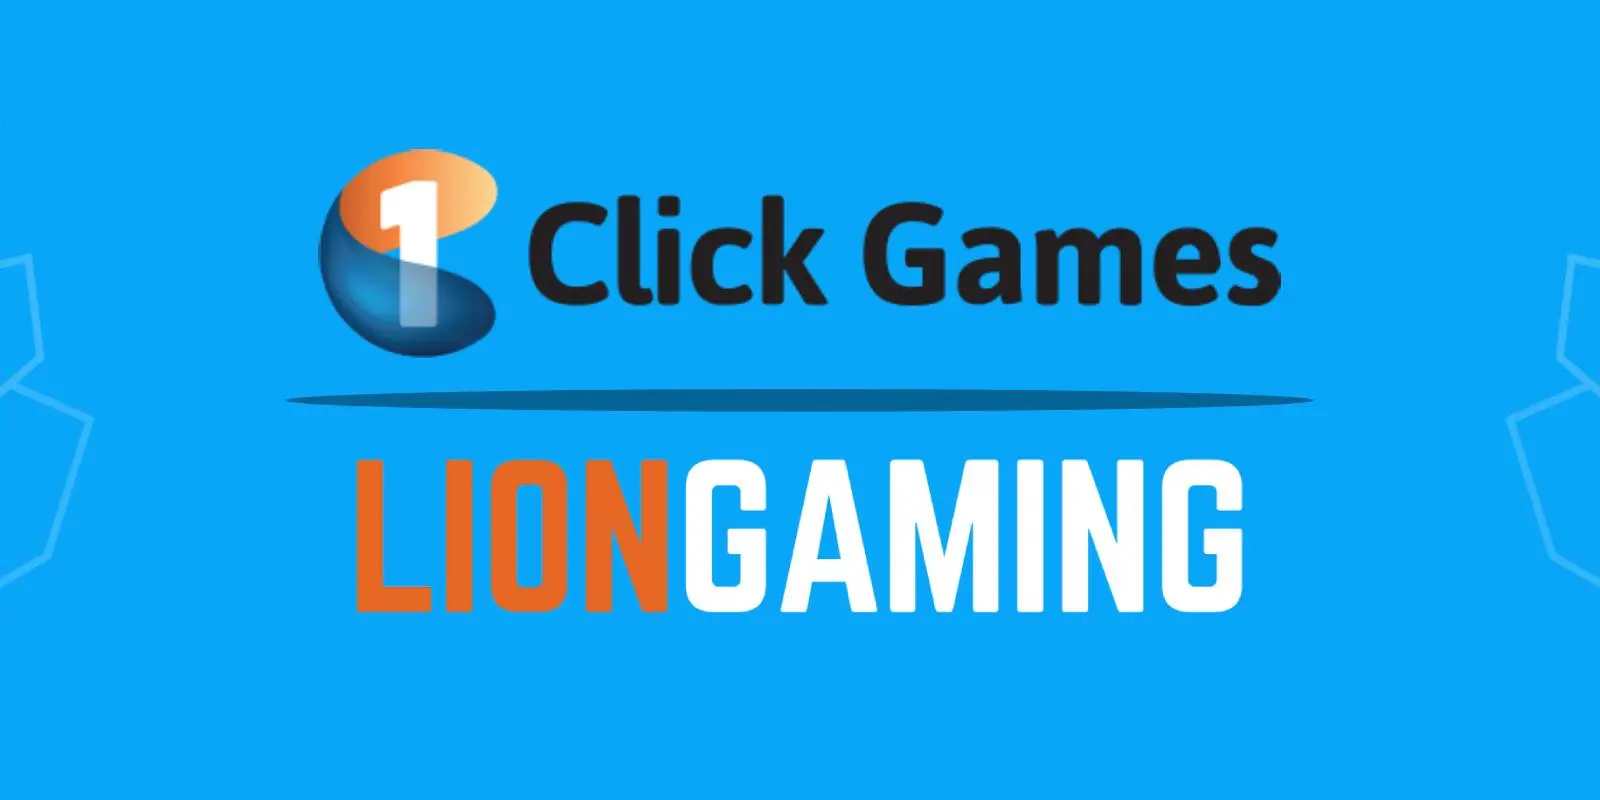 Lion Gaming Purchases 1Click Games